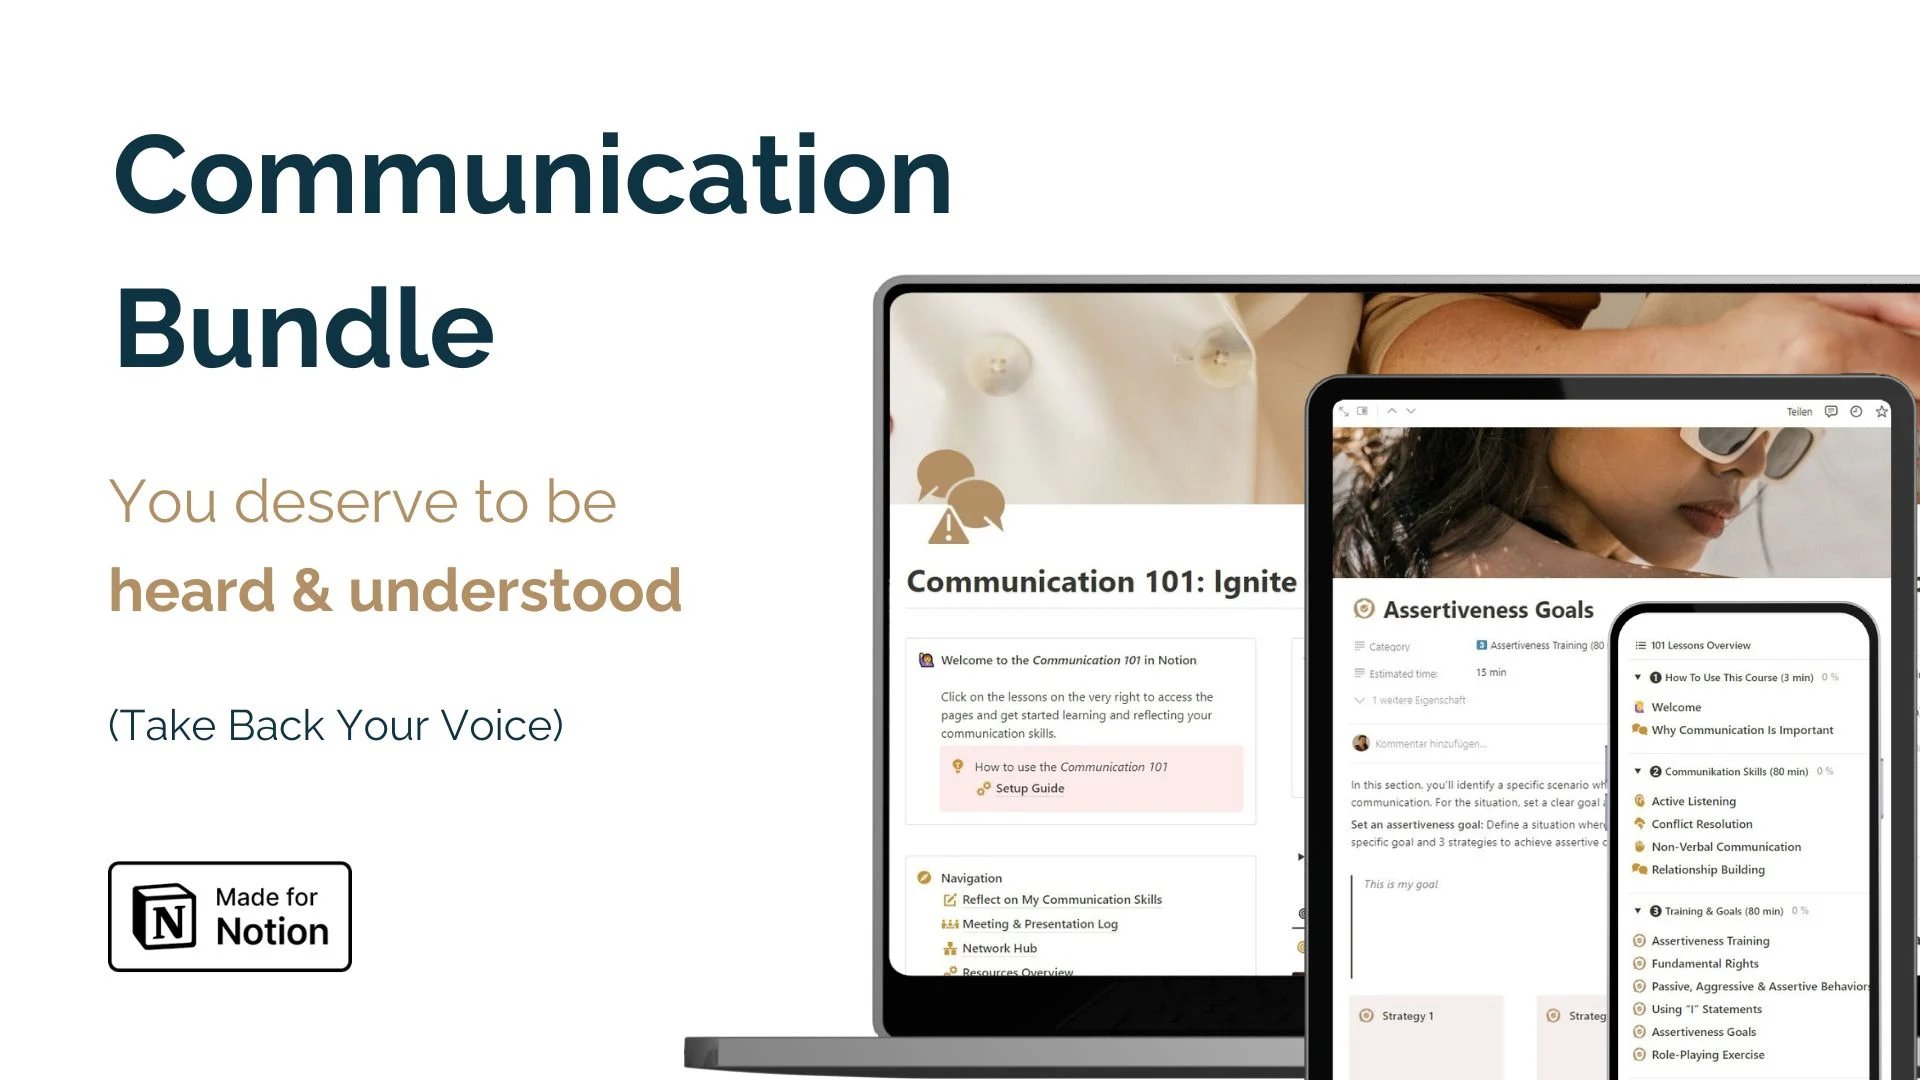 The Ultimate Course and all-in-one Notion Operating System to improve your communication skills. The Communication Bundle is here to ignite Your Communication Skills, Speak Up & Build Lasting Connections.
If that sounds familiar: